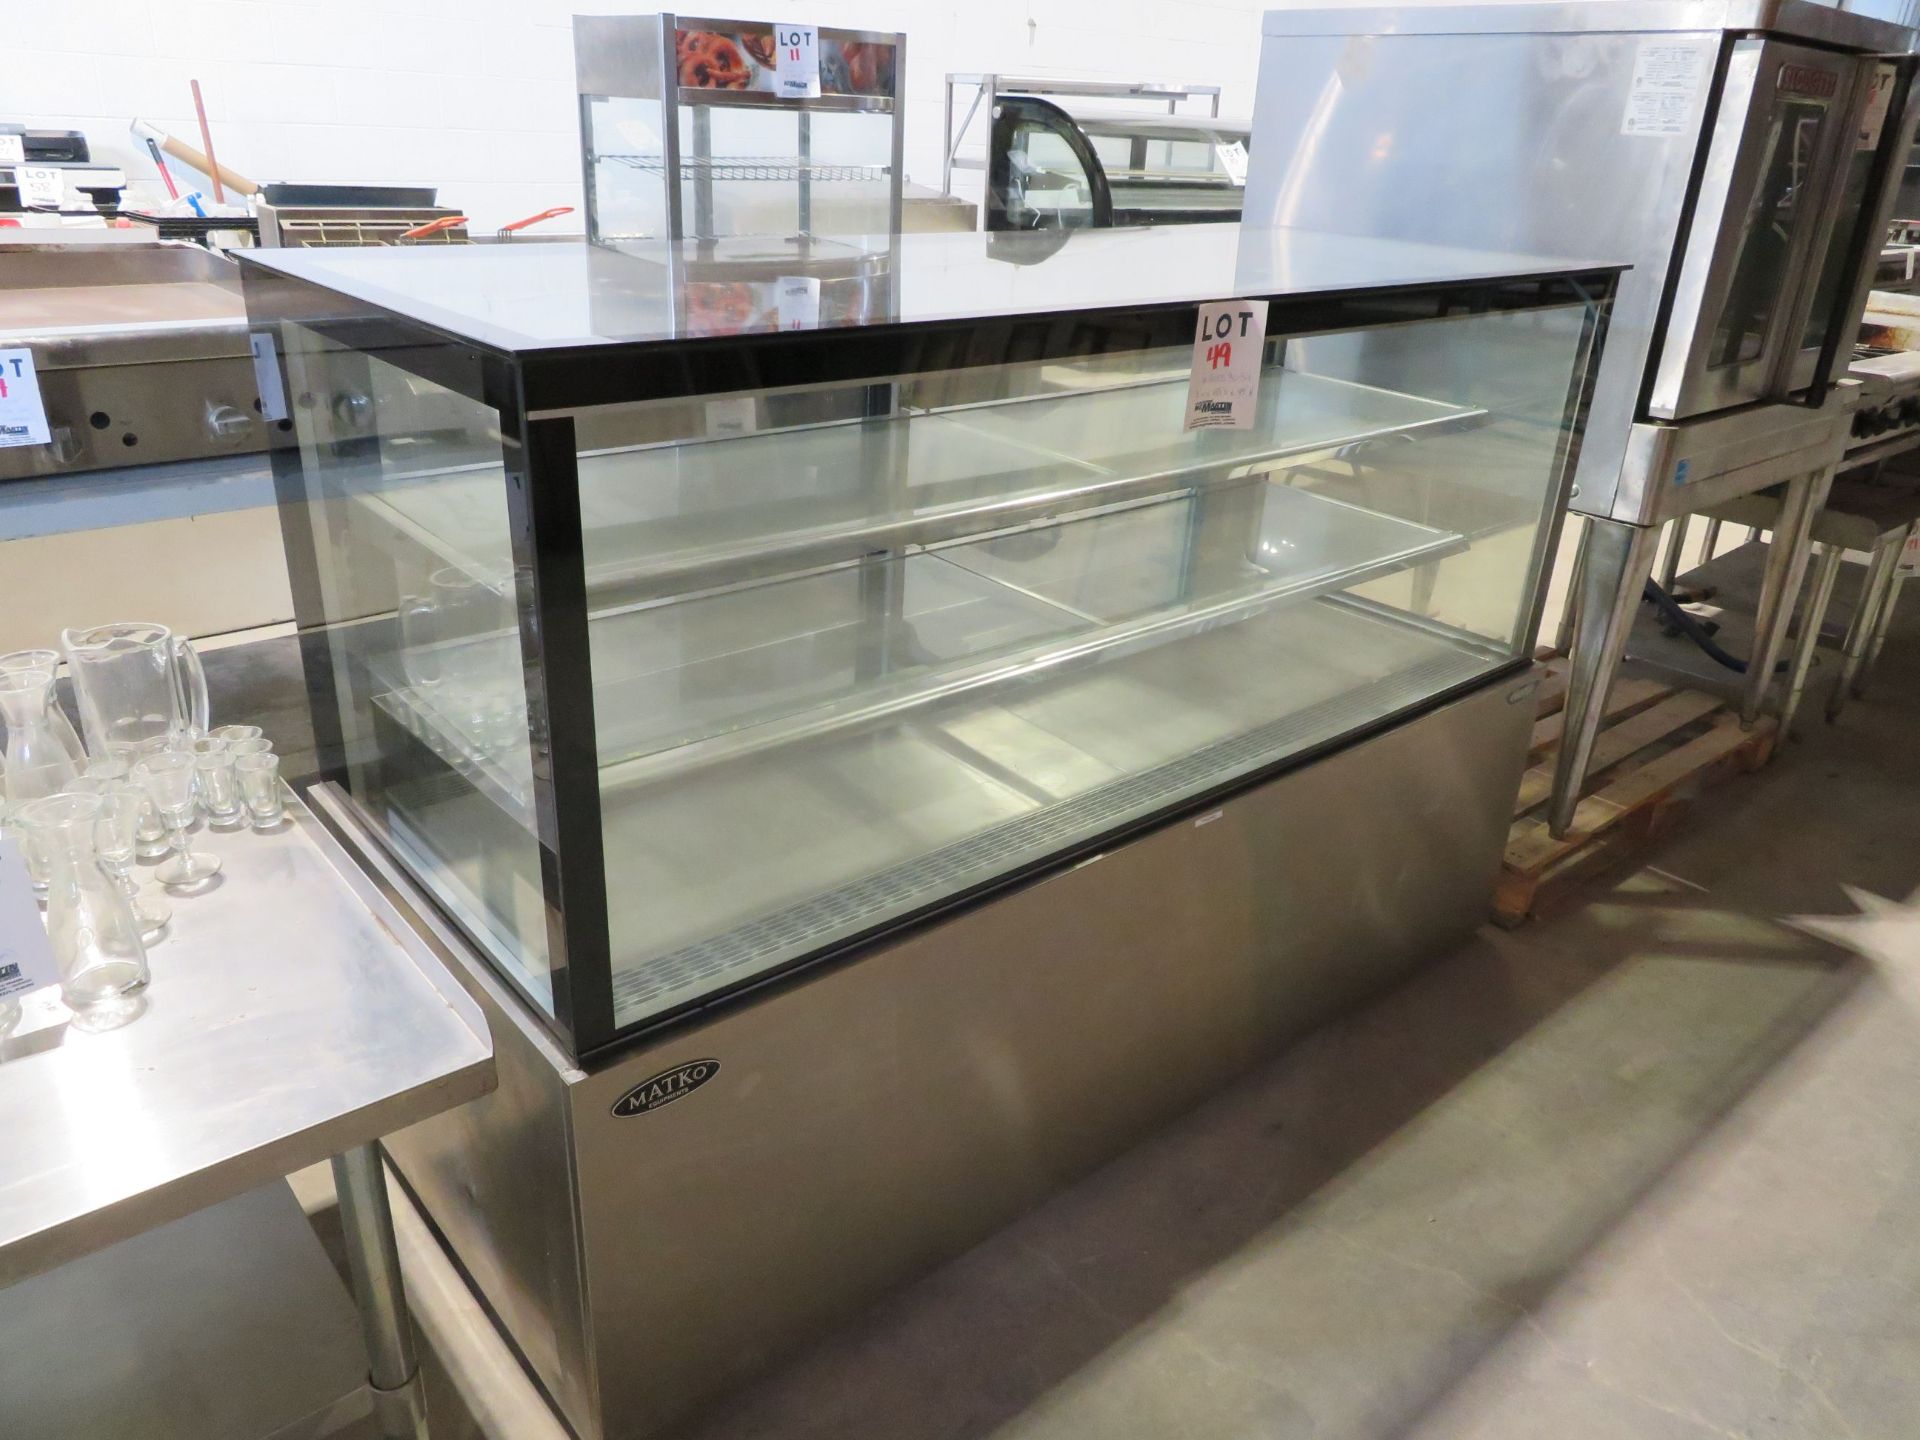 MATKO glass refrigerated display counter approx. 70"w x 28.5"d x 47"h